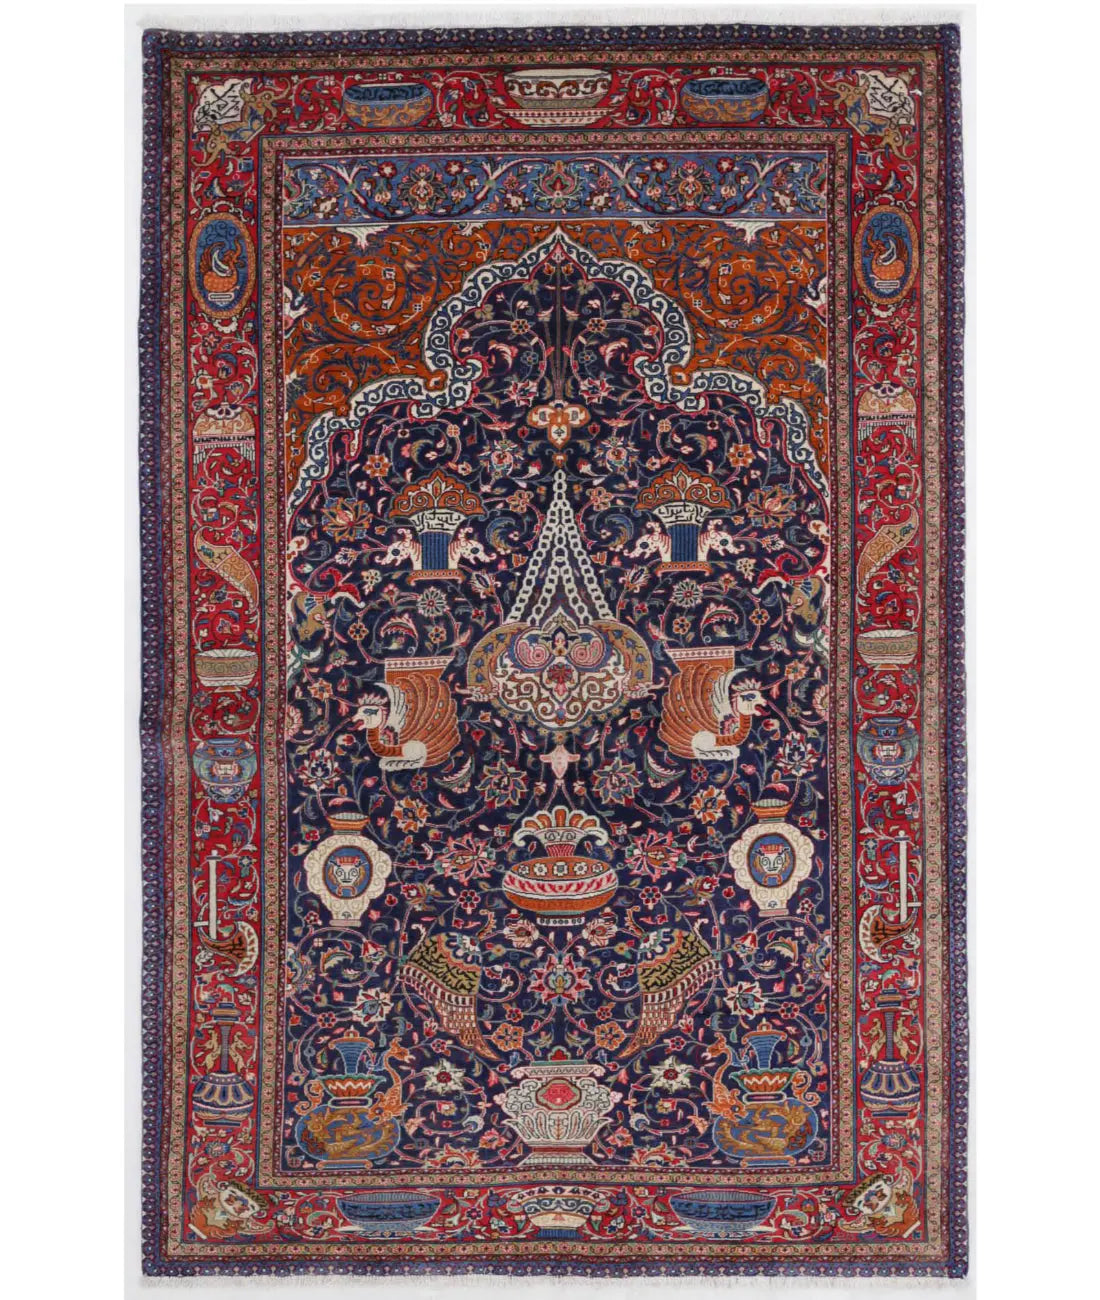 Hand Knotted Antique Persian Tabriz Fine Wool Rug - 4'6'' x 6'9''